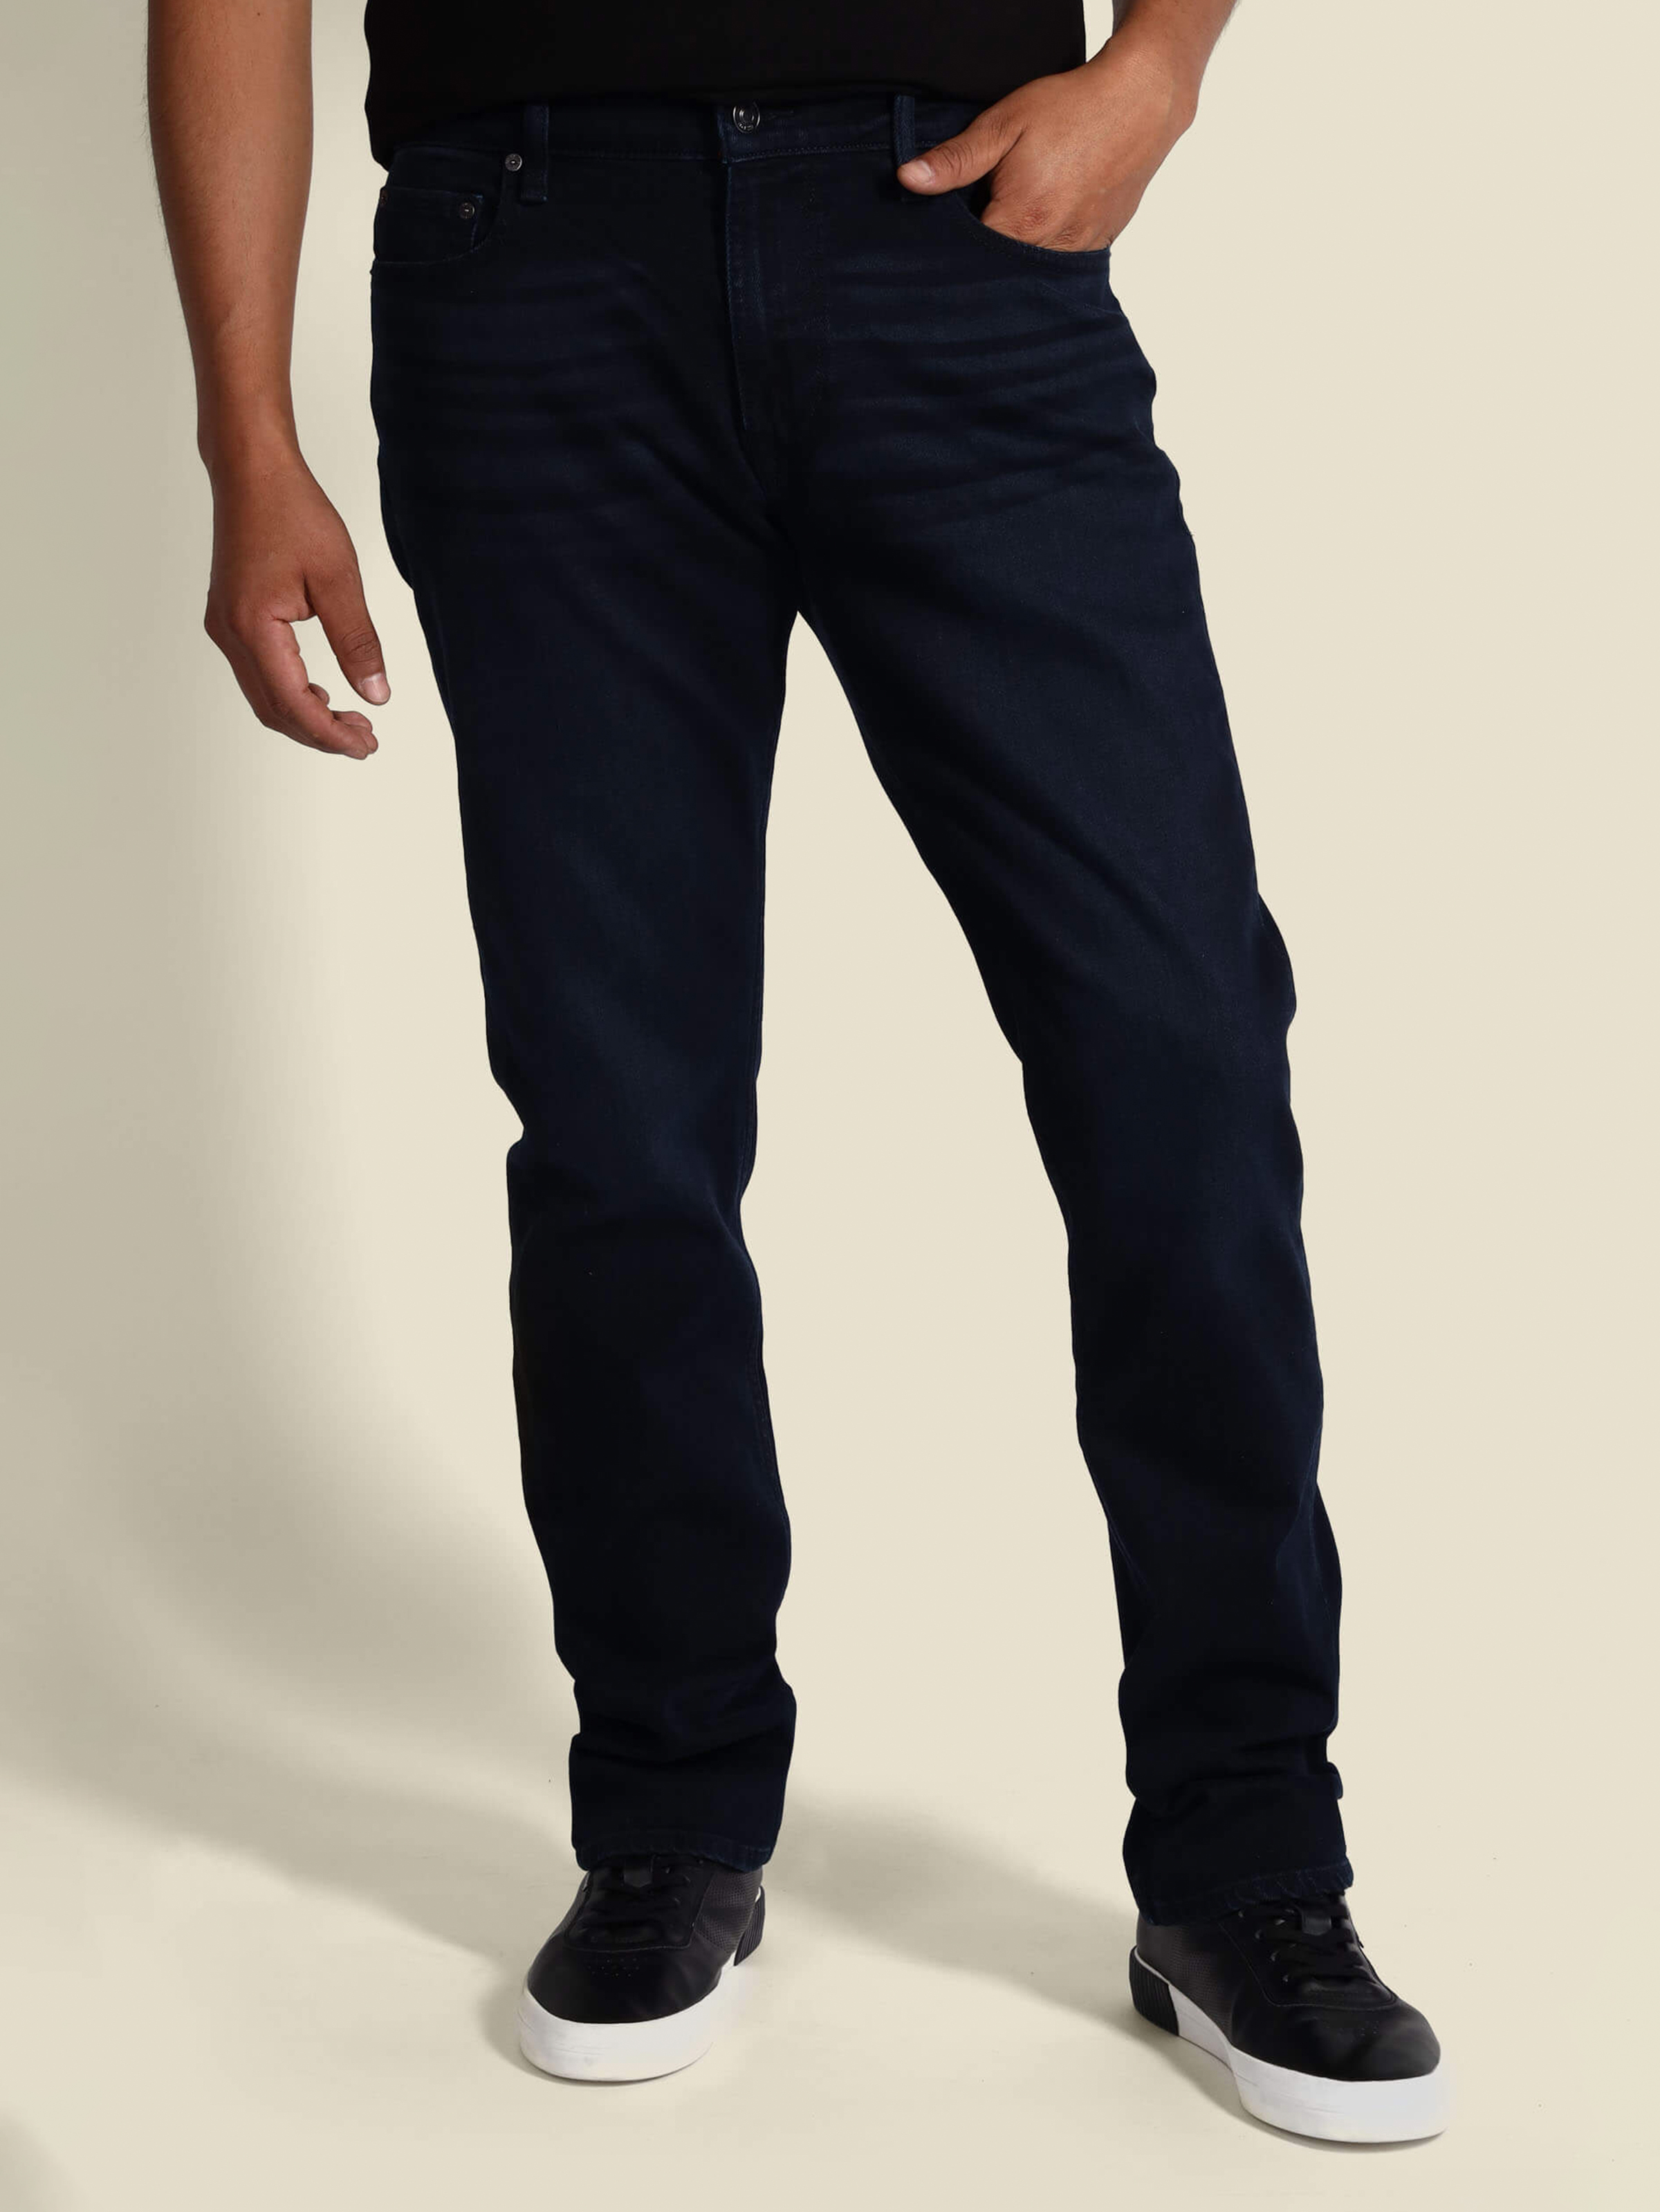 Jeans - hombre - undefined